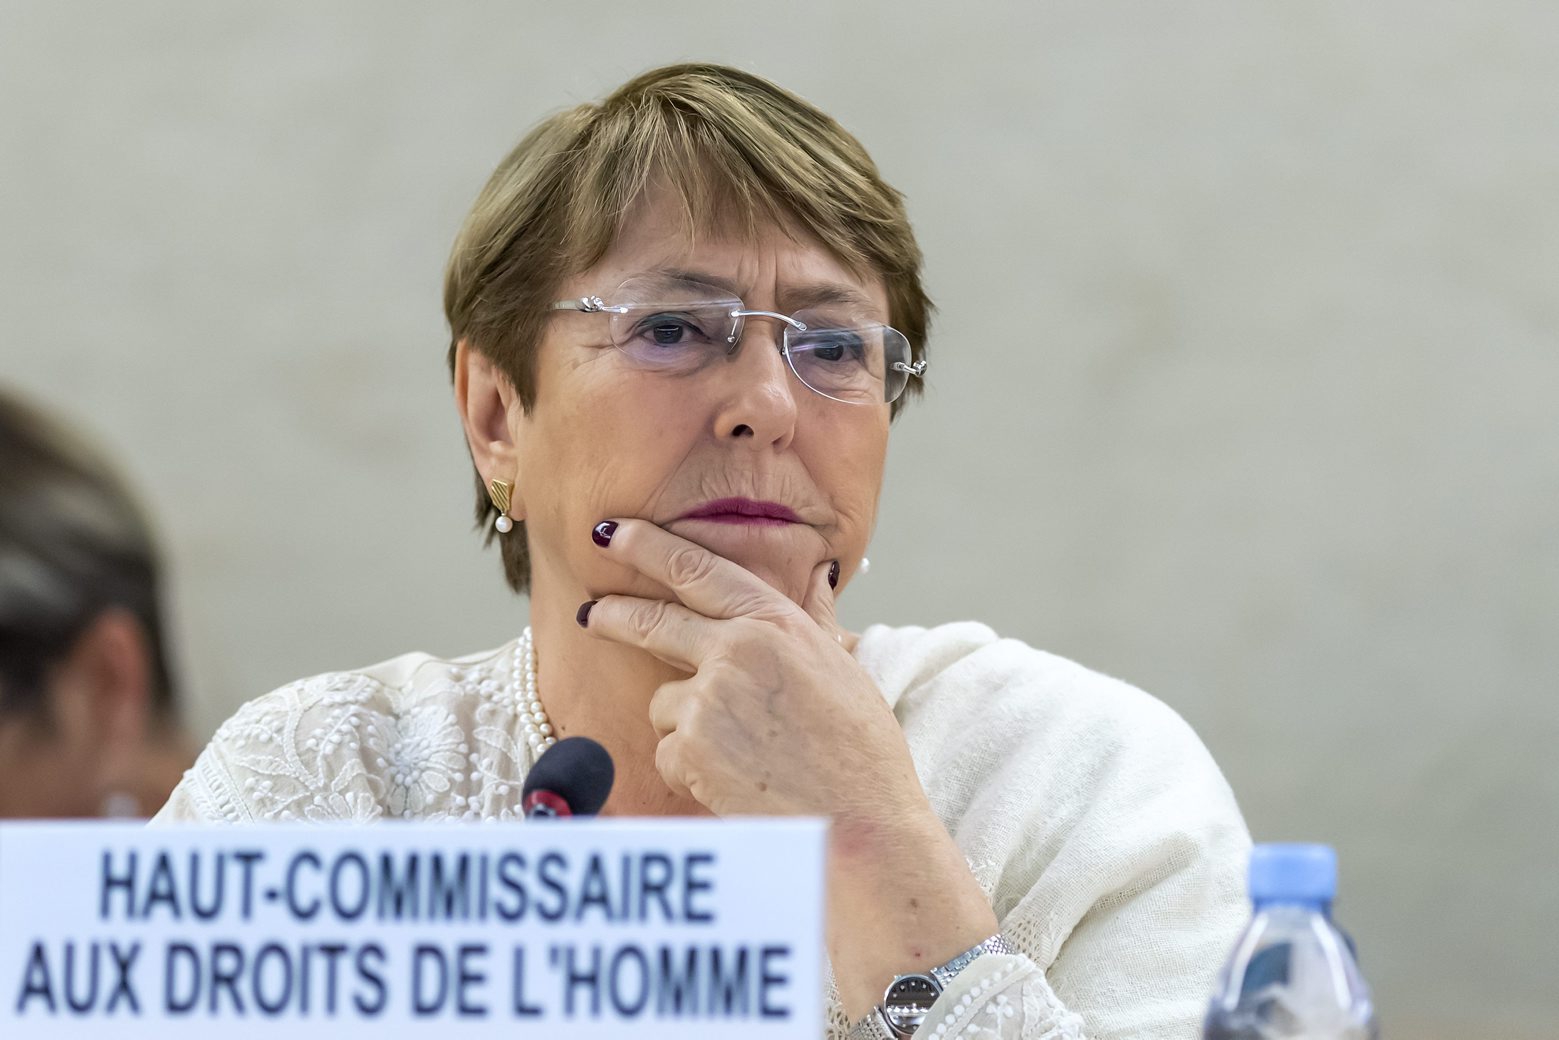 U.N. High Commissioner for Human Rights Chilean Michelle Bachelet, talk about the situation of human rights in Venezuela, during the 41th session of the Human Rights Council, at the European headquarters of the United Nations in Geneva, Switzerland, Friday, July 05, 2019. (KEYSTONE/Martial Trezzini) SWITZERLAND HUMAN RIGHTS VENEZULA